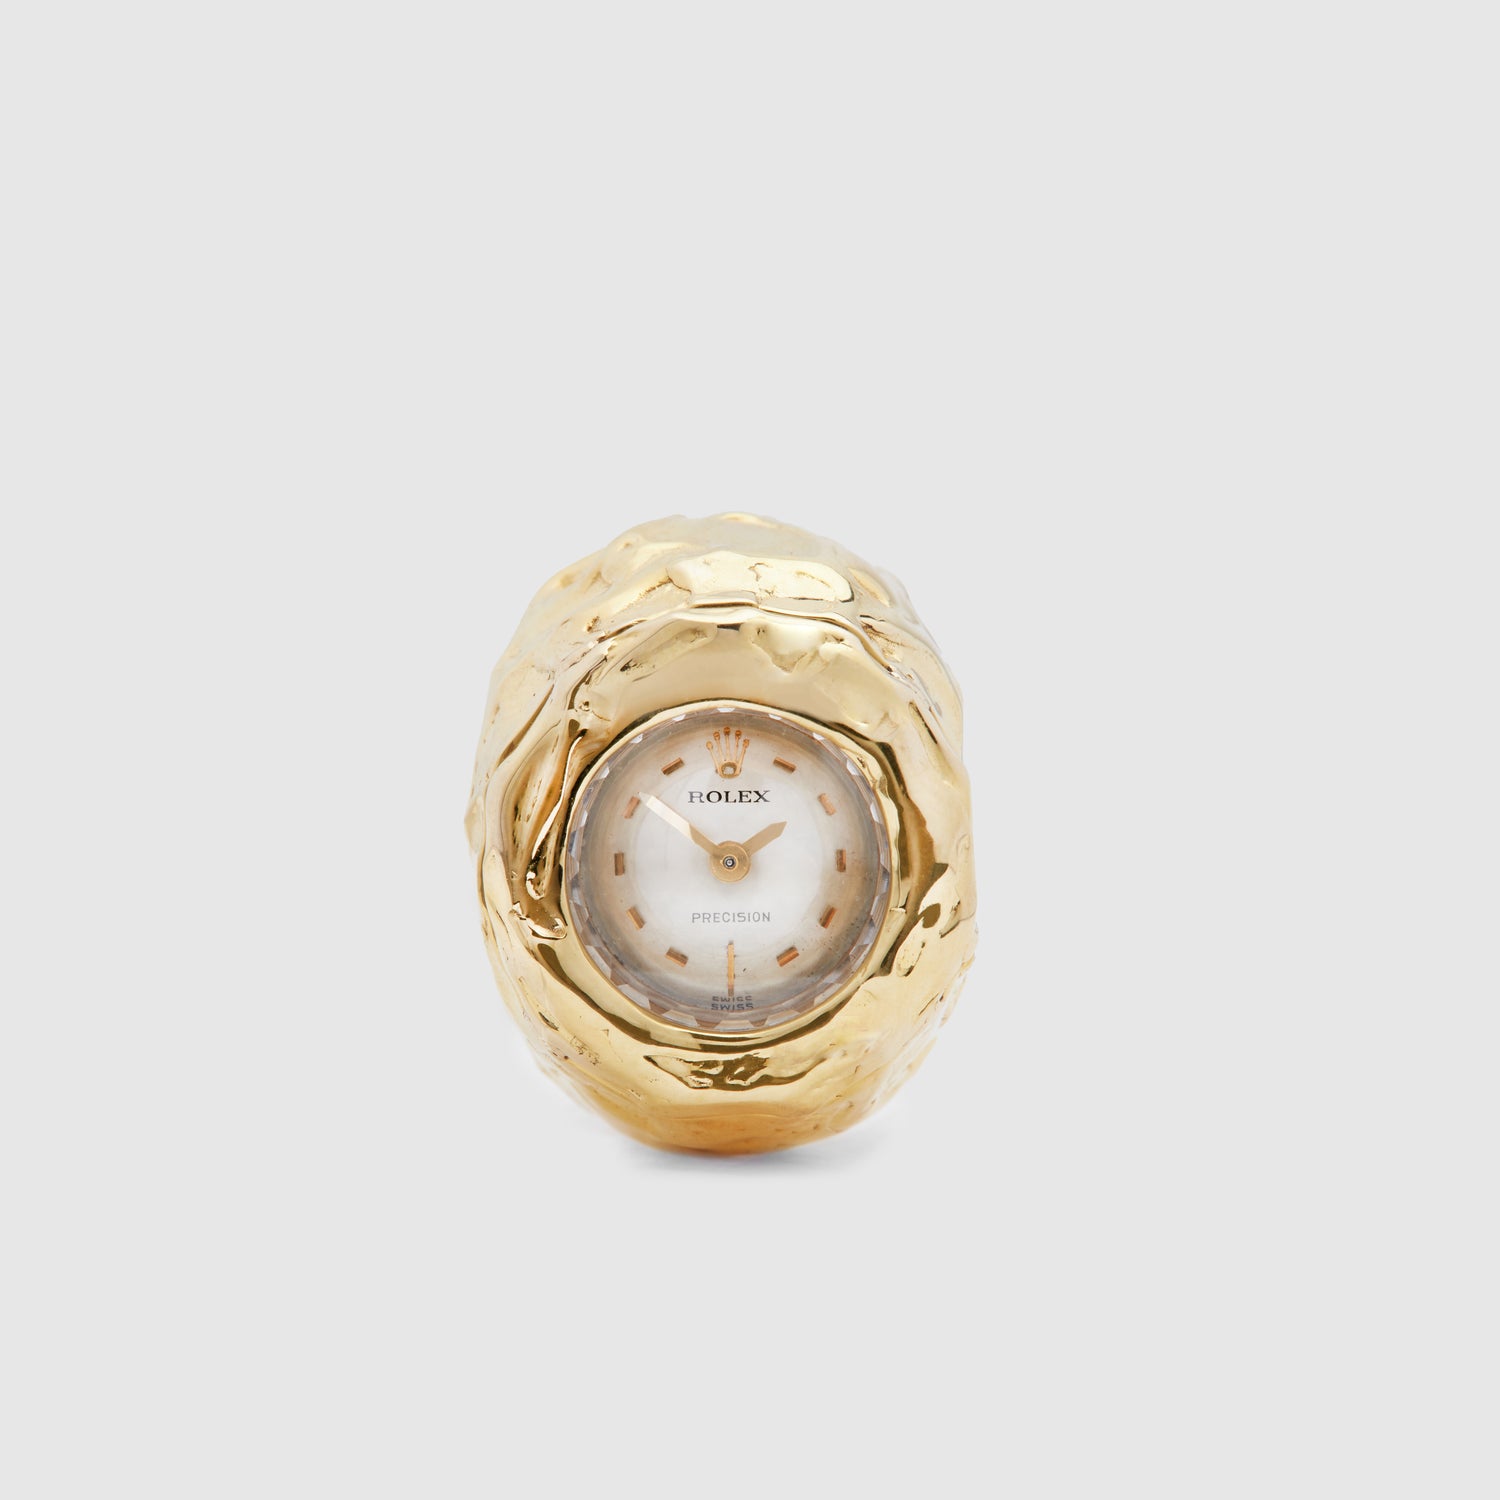 The Signet - Customised Vintage Rolex Precision Ring Watch